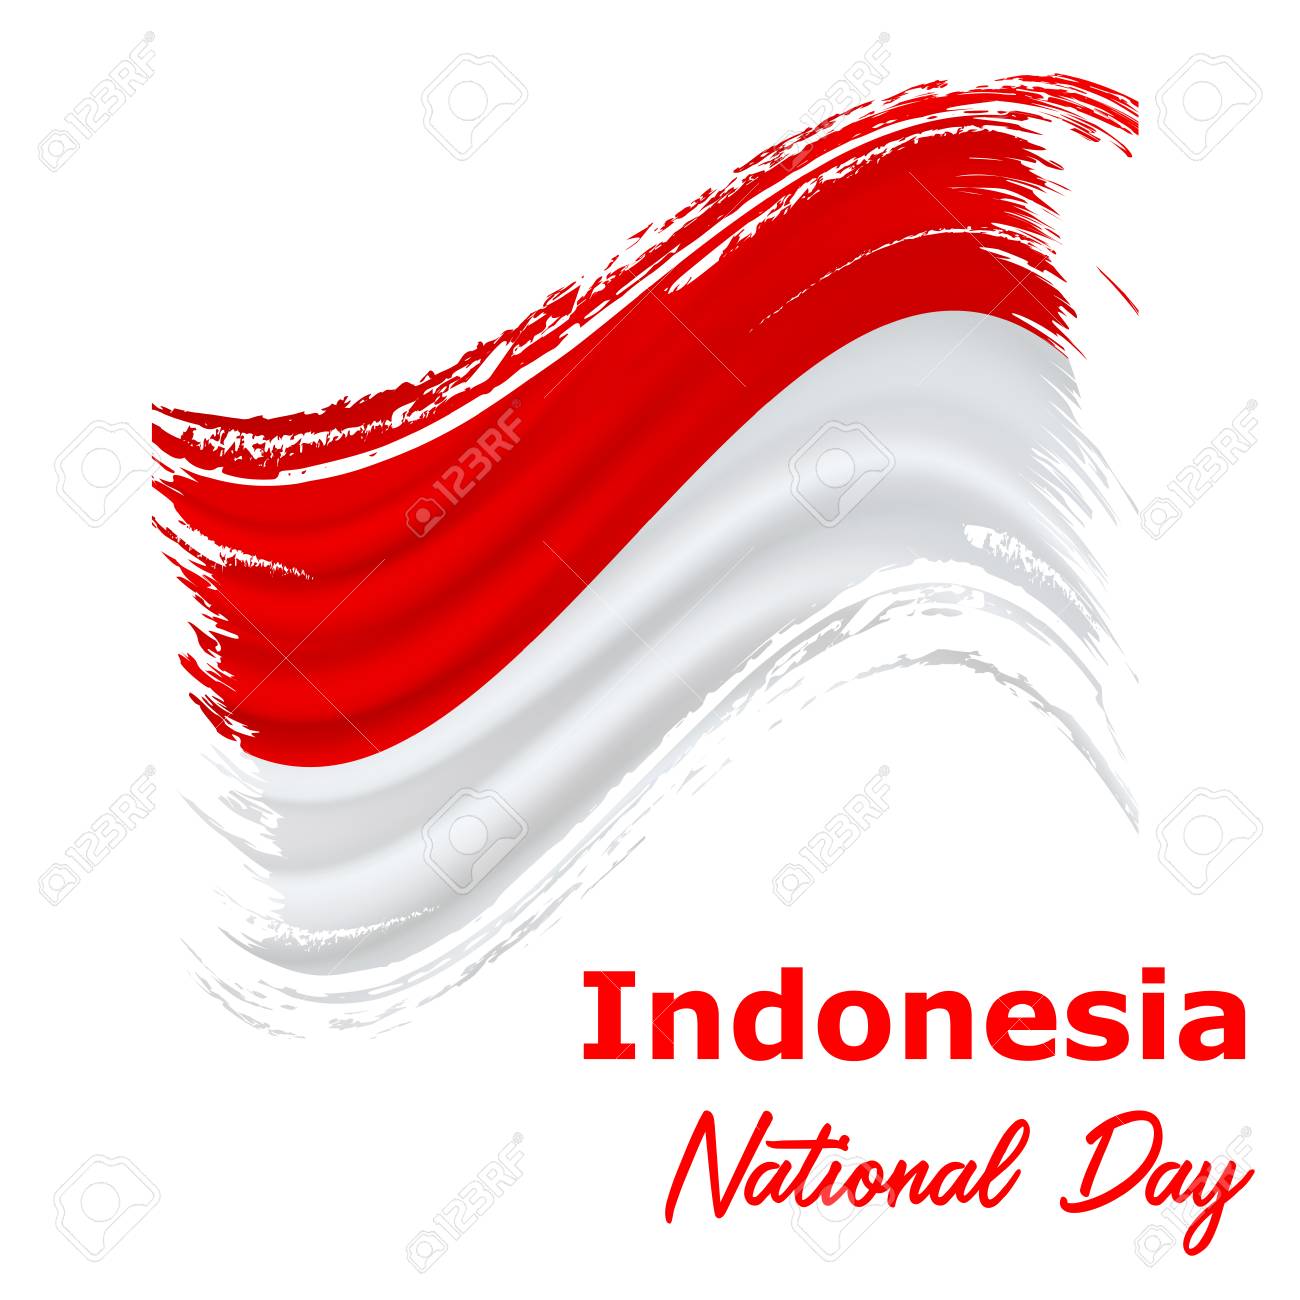 Indonesian Independence Day New DP for Whatsapp/Facebook 2020